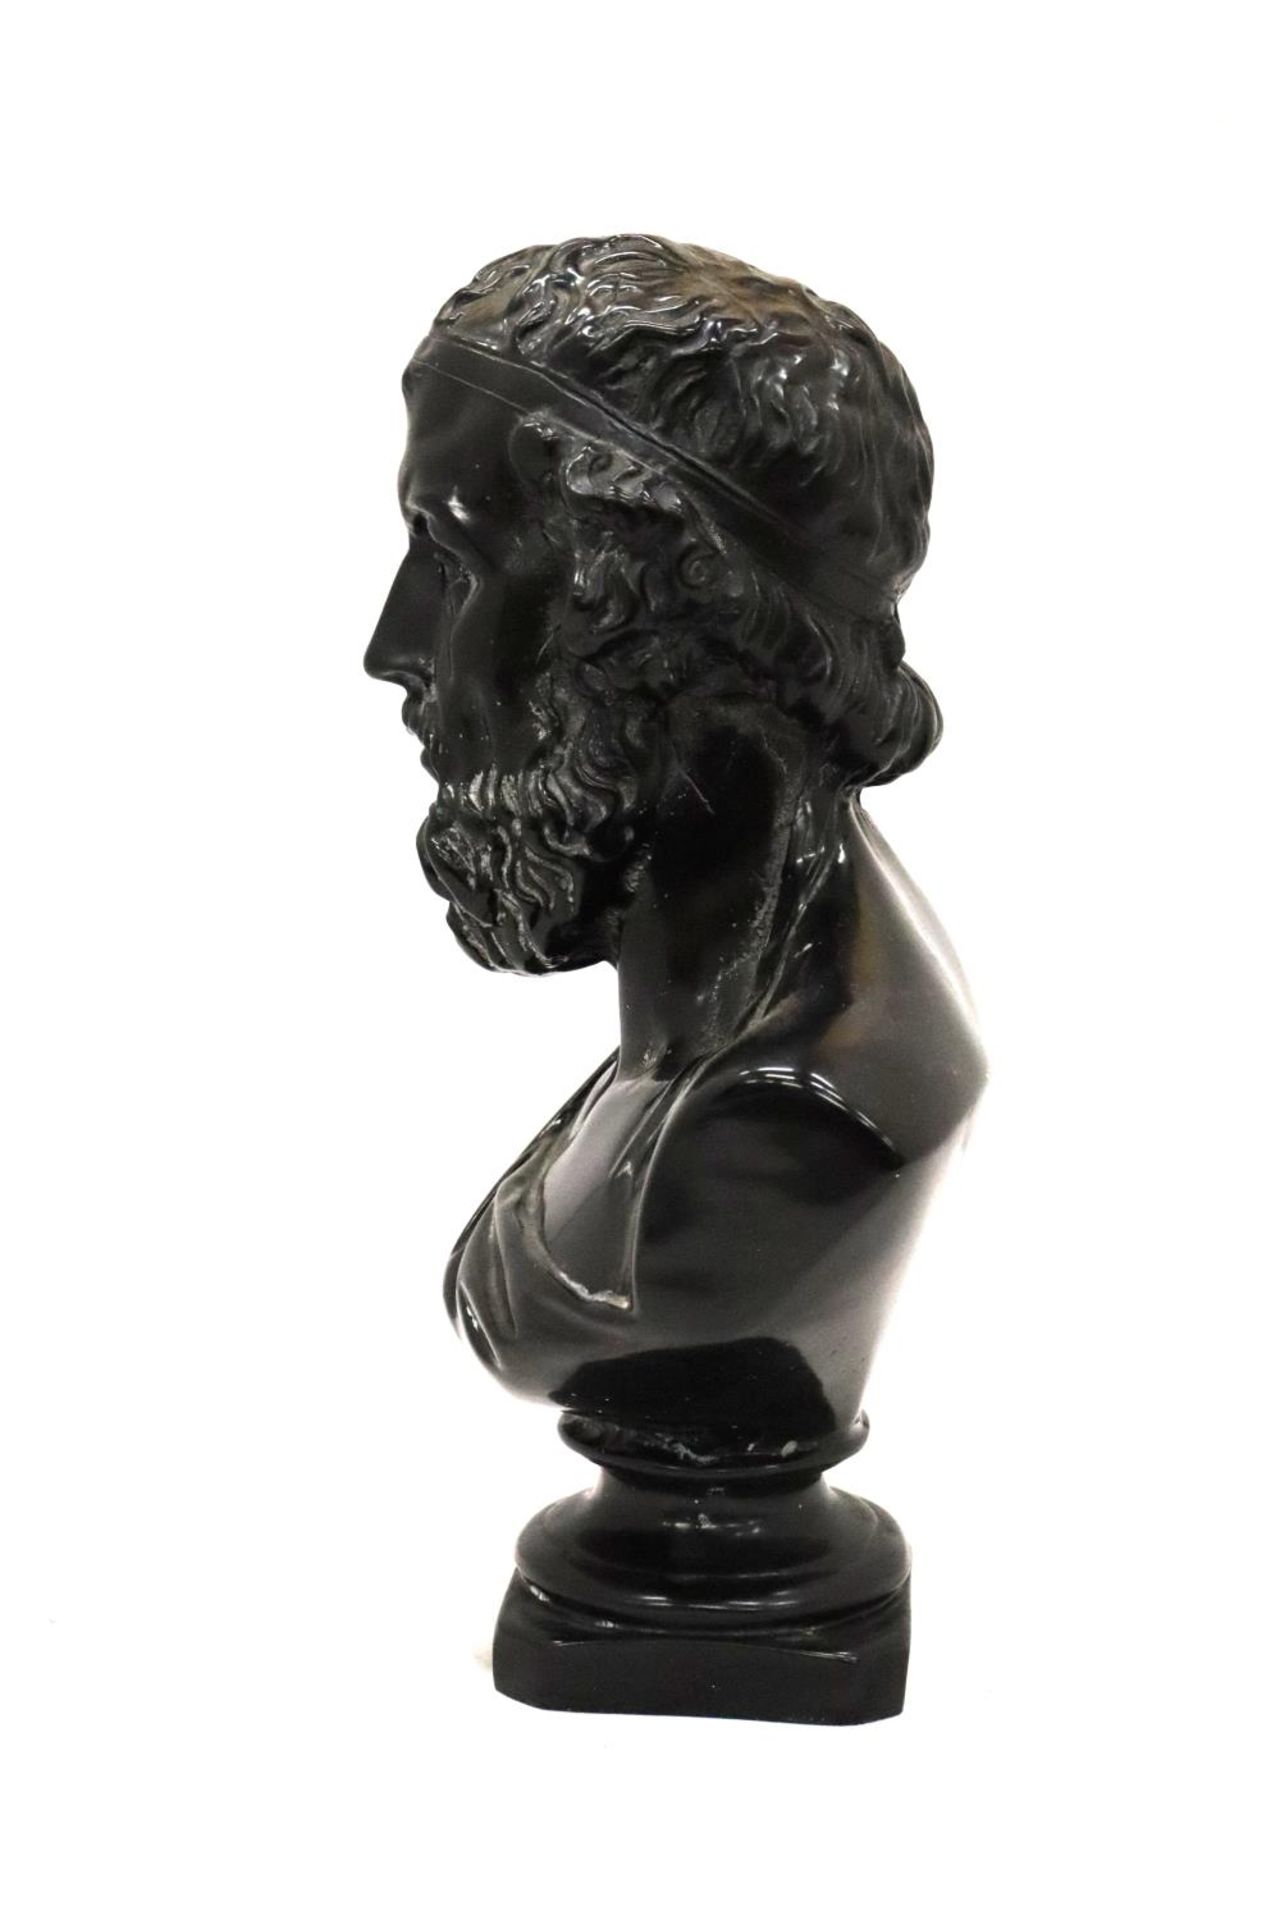 A HEAVY RESIN BUST OF CLASSICAL GREEK POET TITLED - 'HOMERE', HEIGHT 30 CM - Image 2 of 4